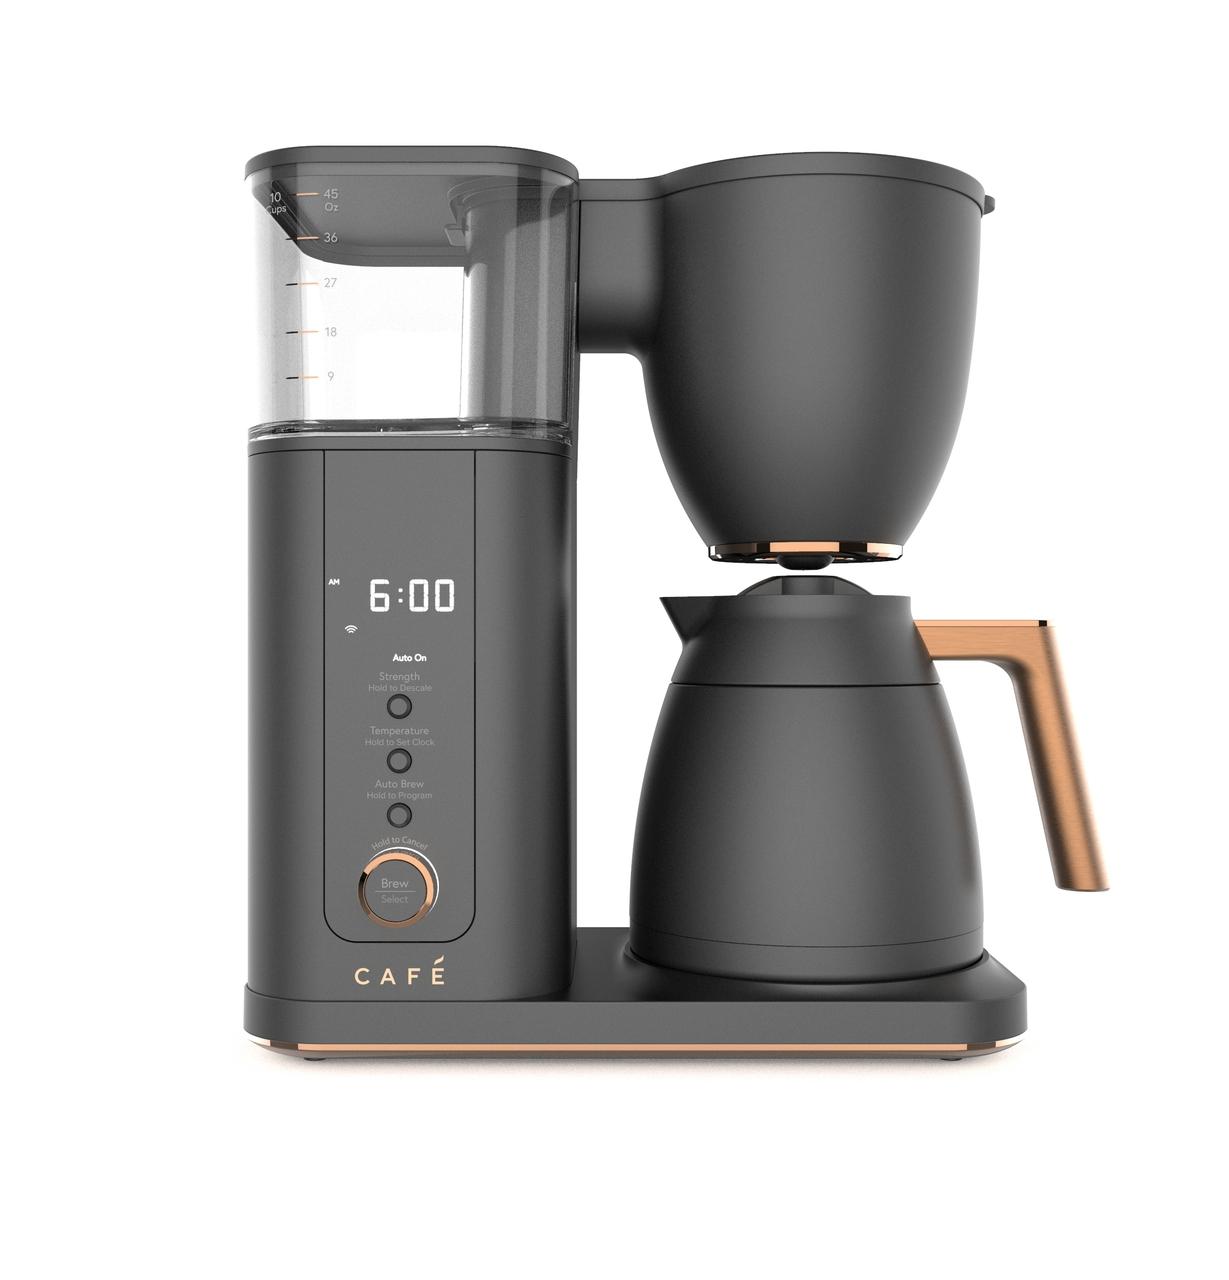 Cafe Caf(eback)™ Specialty Drip Coffee Maker